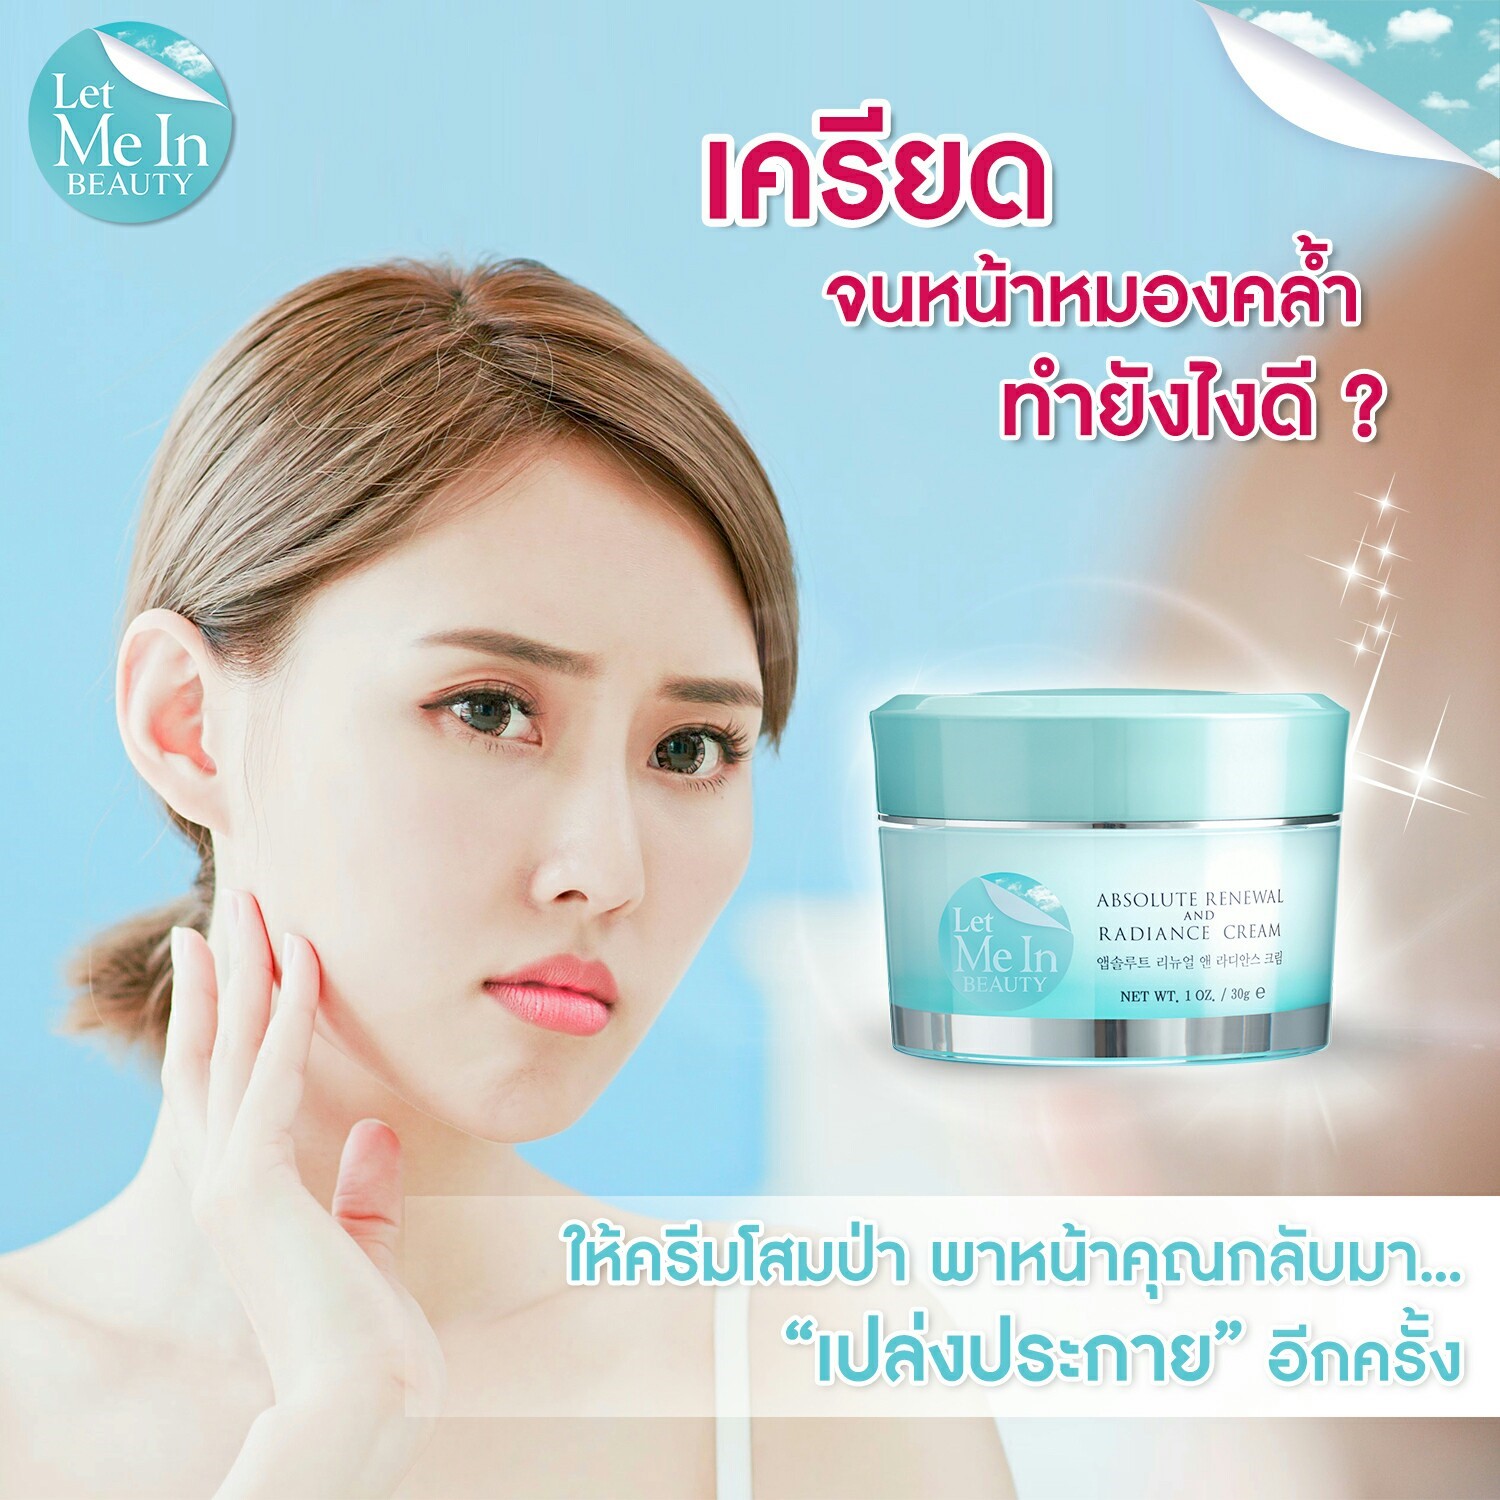 Let Me In Beauty , Radiance Cream,Cream , เลทมีอินบิวตี้,let me in beauty ราคา, let me in beauty ดีไหม, let me in beauty ขายที่ไหน ,ครีม let me in beauty ซื้อที่ไหน ,let me in beauty ซื้อที่ไหน